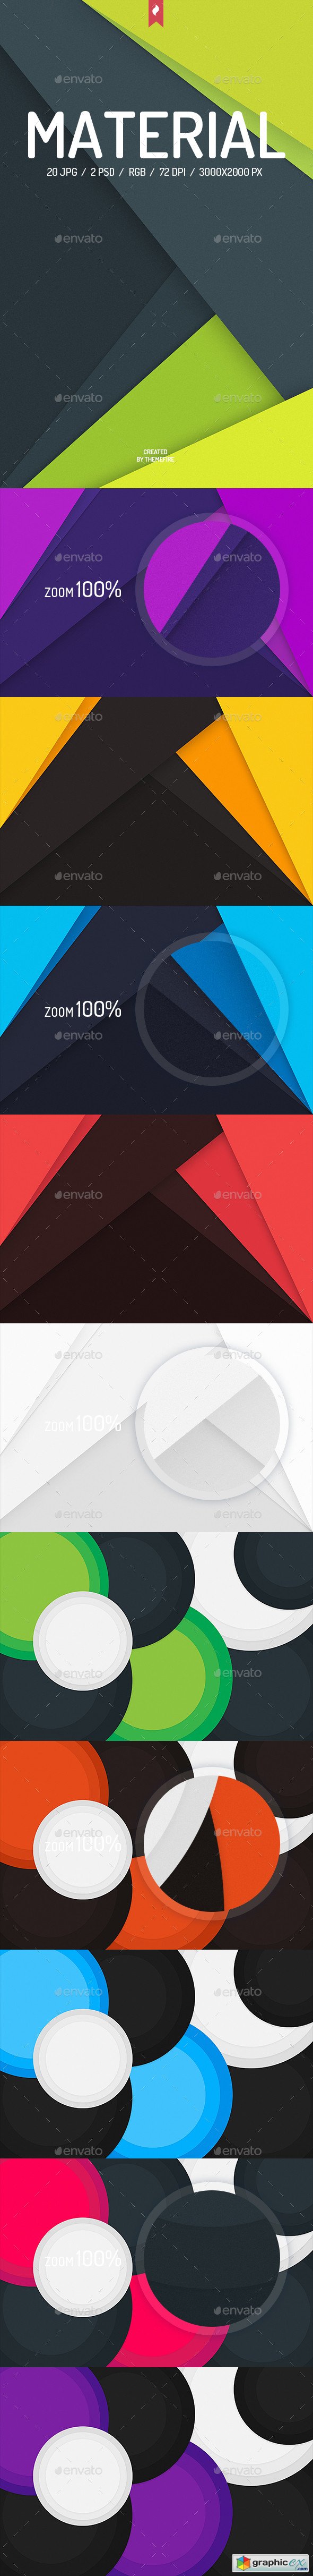 20 Material Design Backgrounds